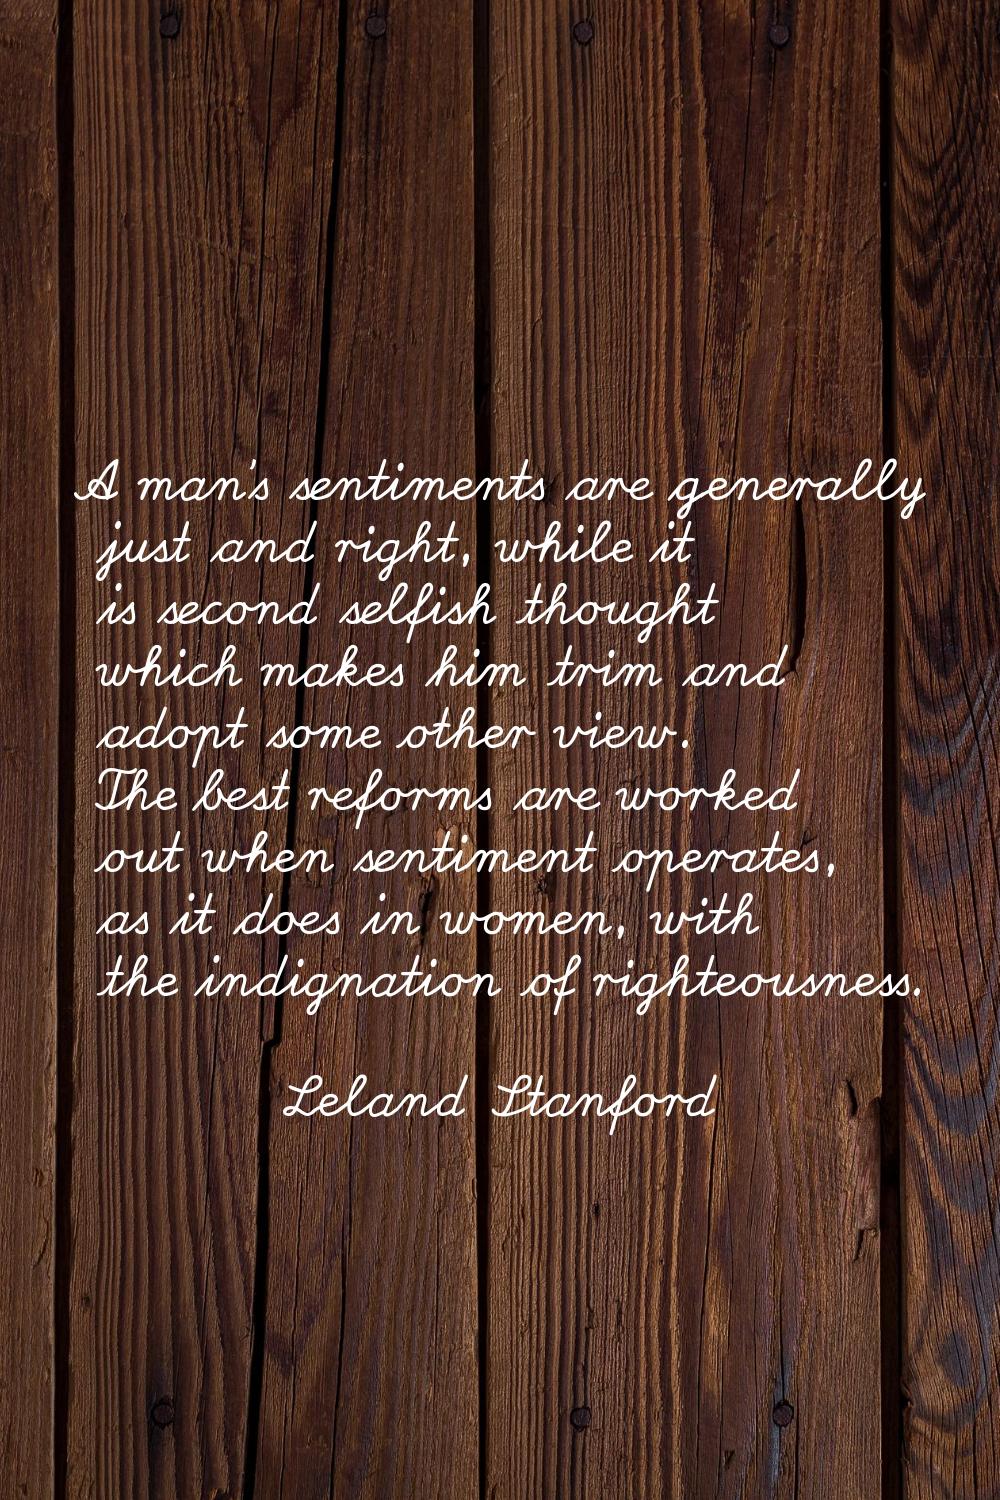 A man's sentiments are generally just and right, while it is second selfish thought which makes him